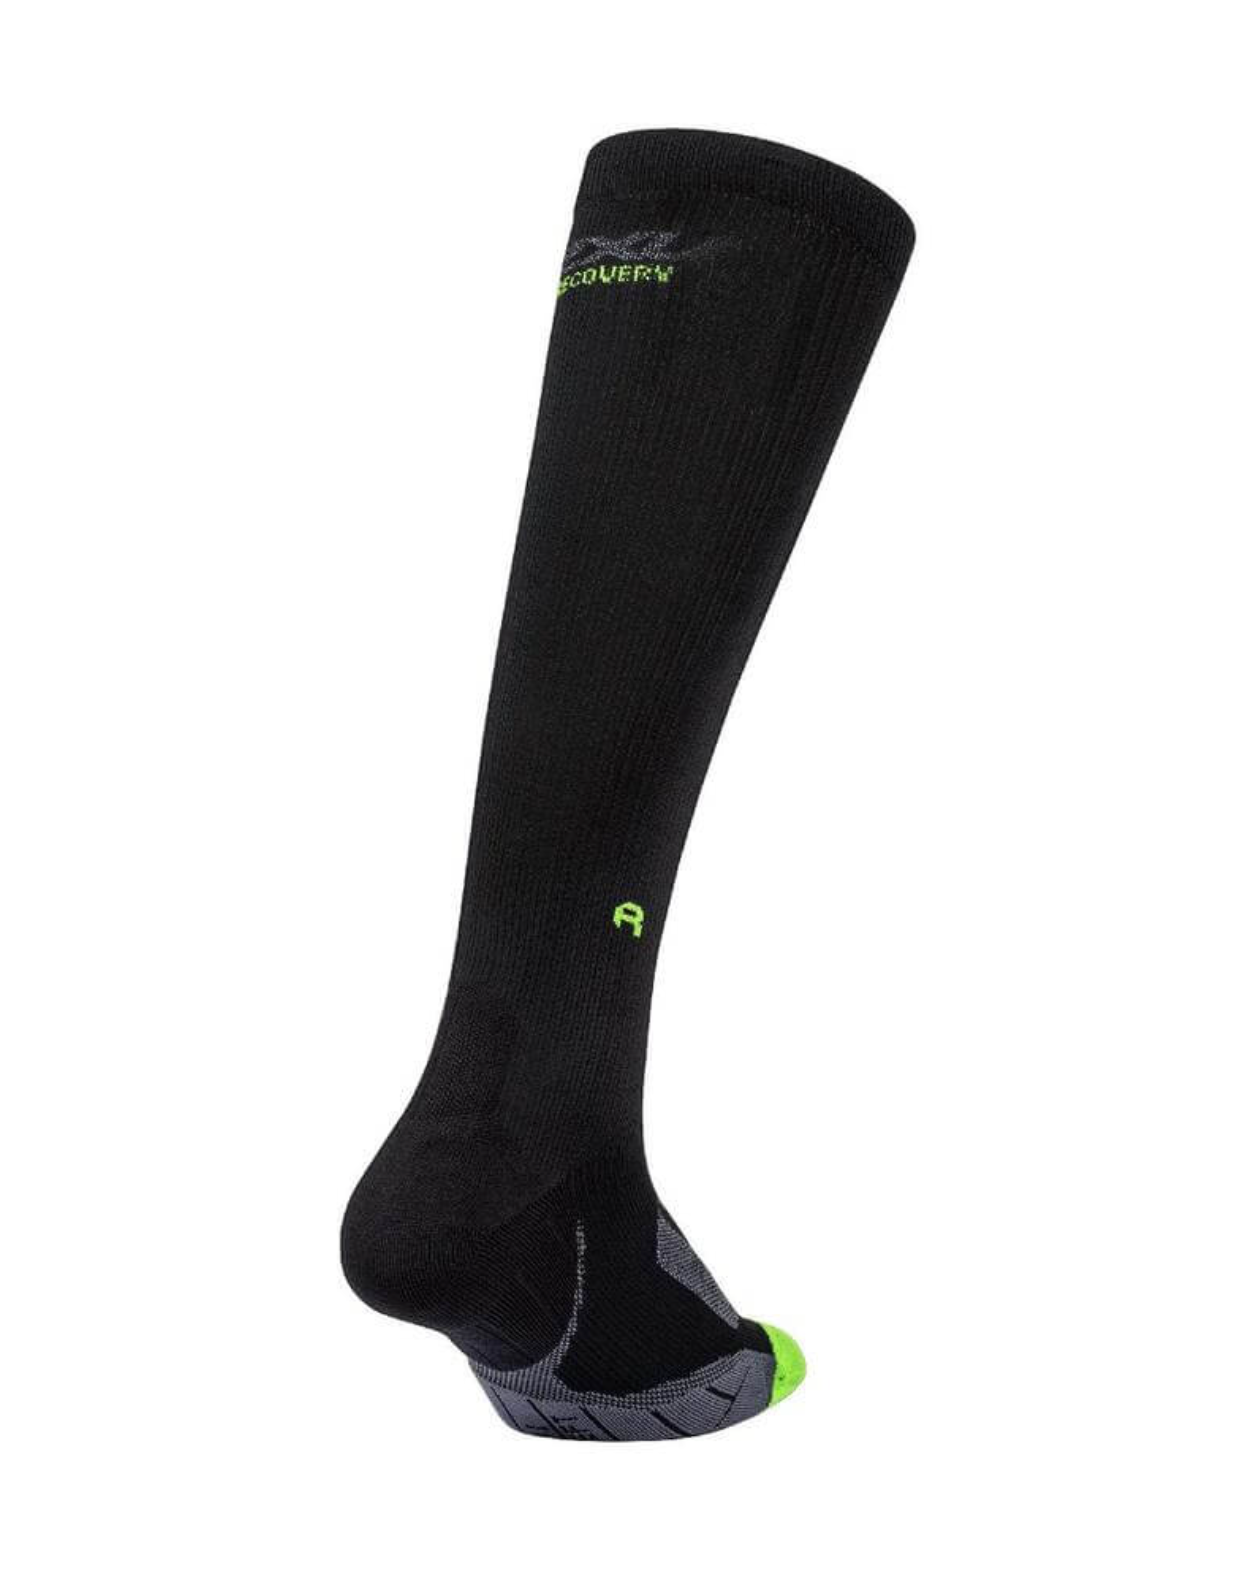 On Calcetines Running Hombre - Performance High - Black & Shadow